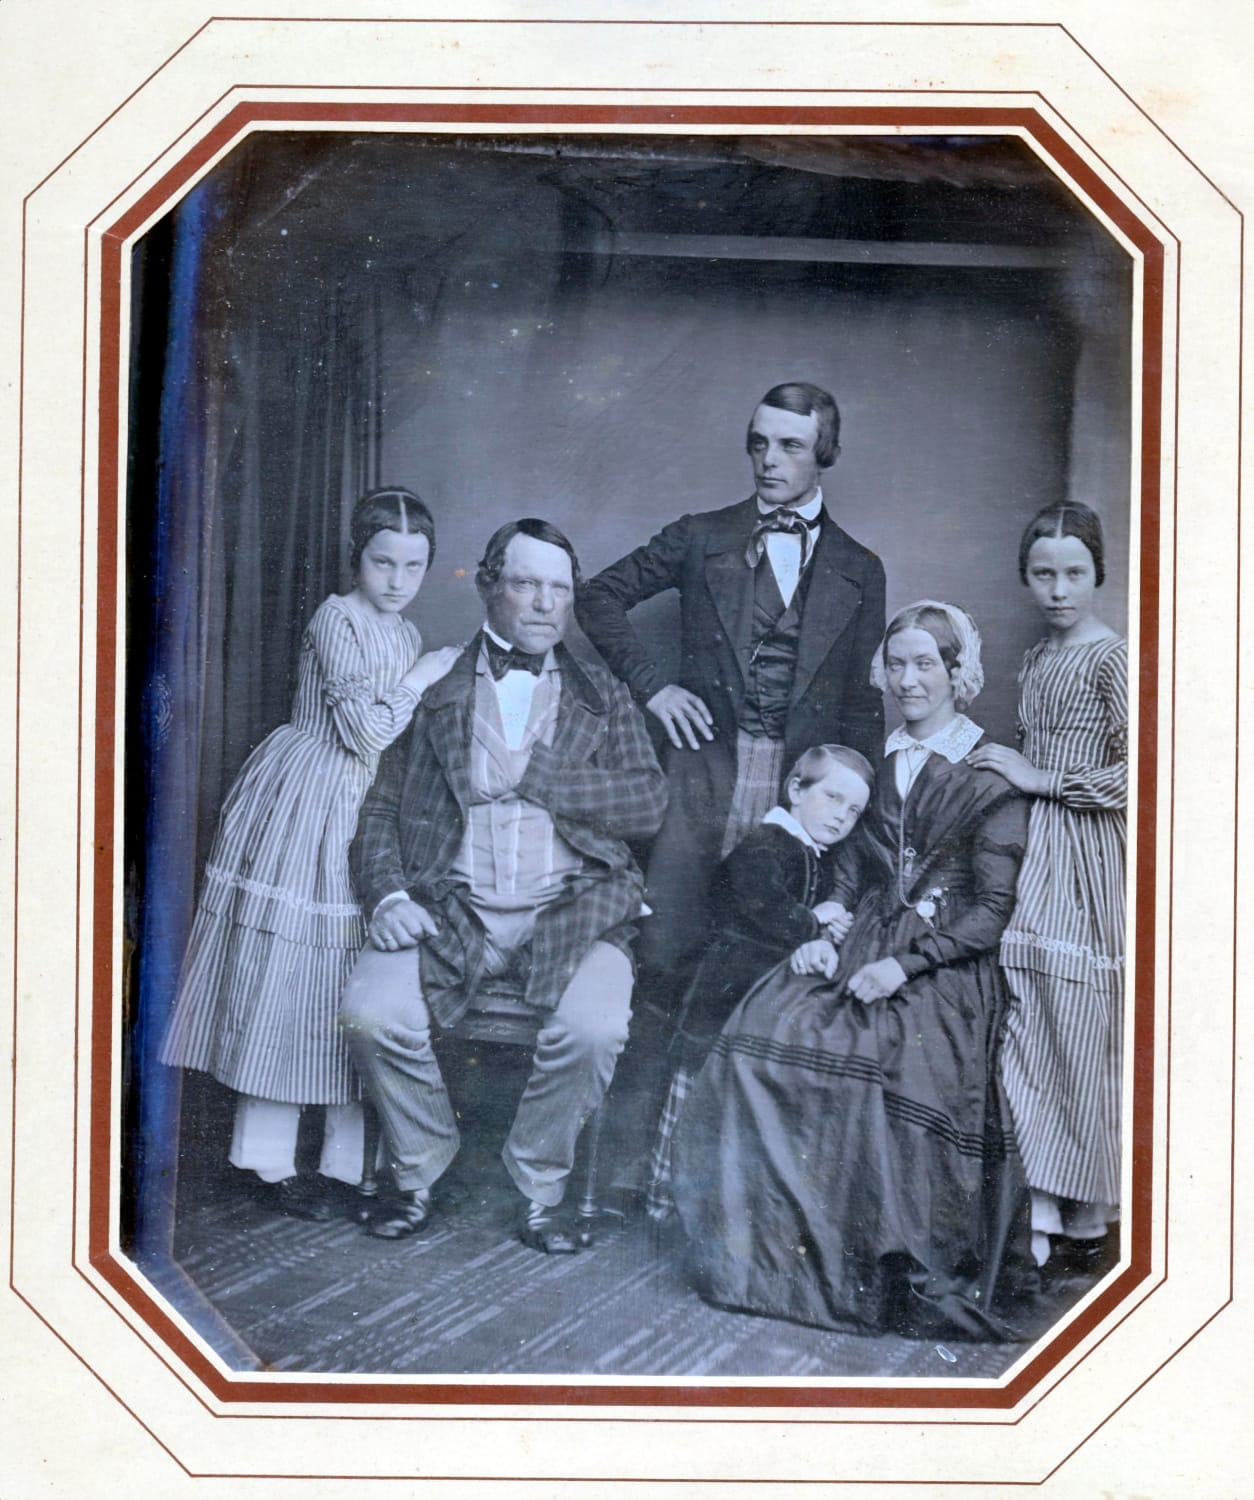 A family portrait. Late 1840's or early 1850's. Sweden.